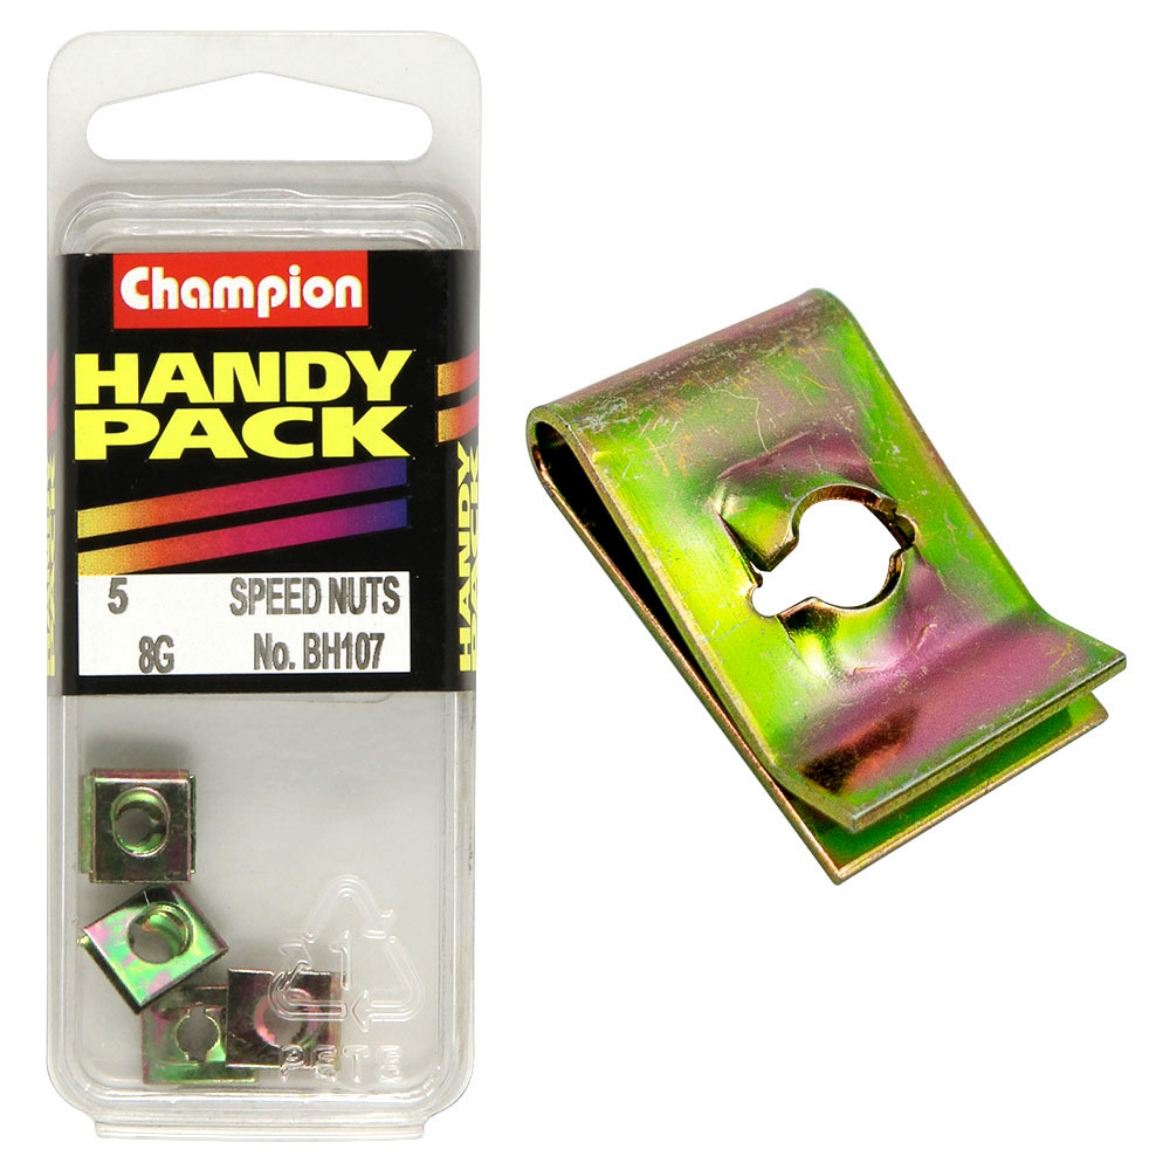 Picture of Handy Pk Speed Nuts 8g x 13/32x11/32 (Pkt.5)